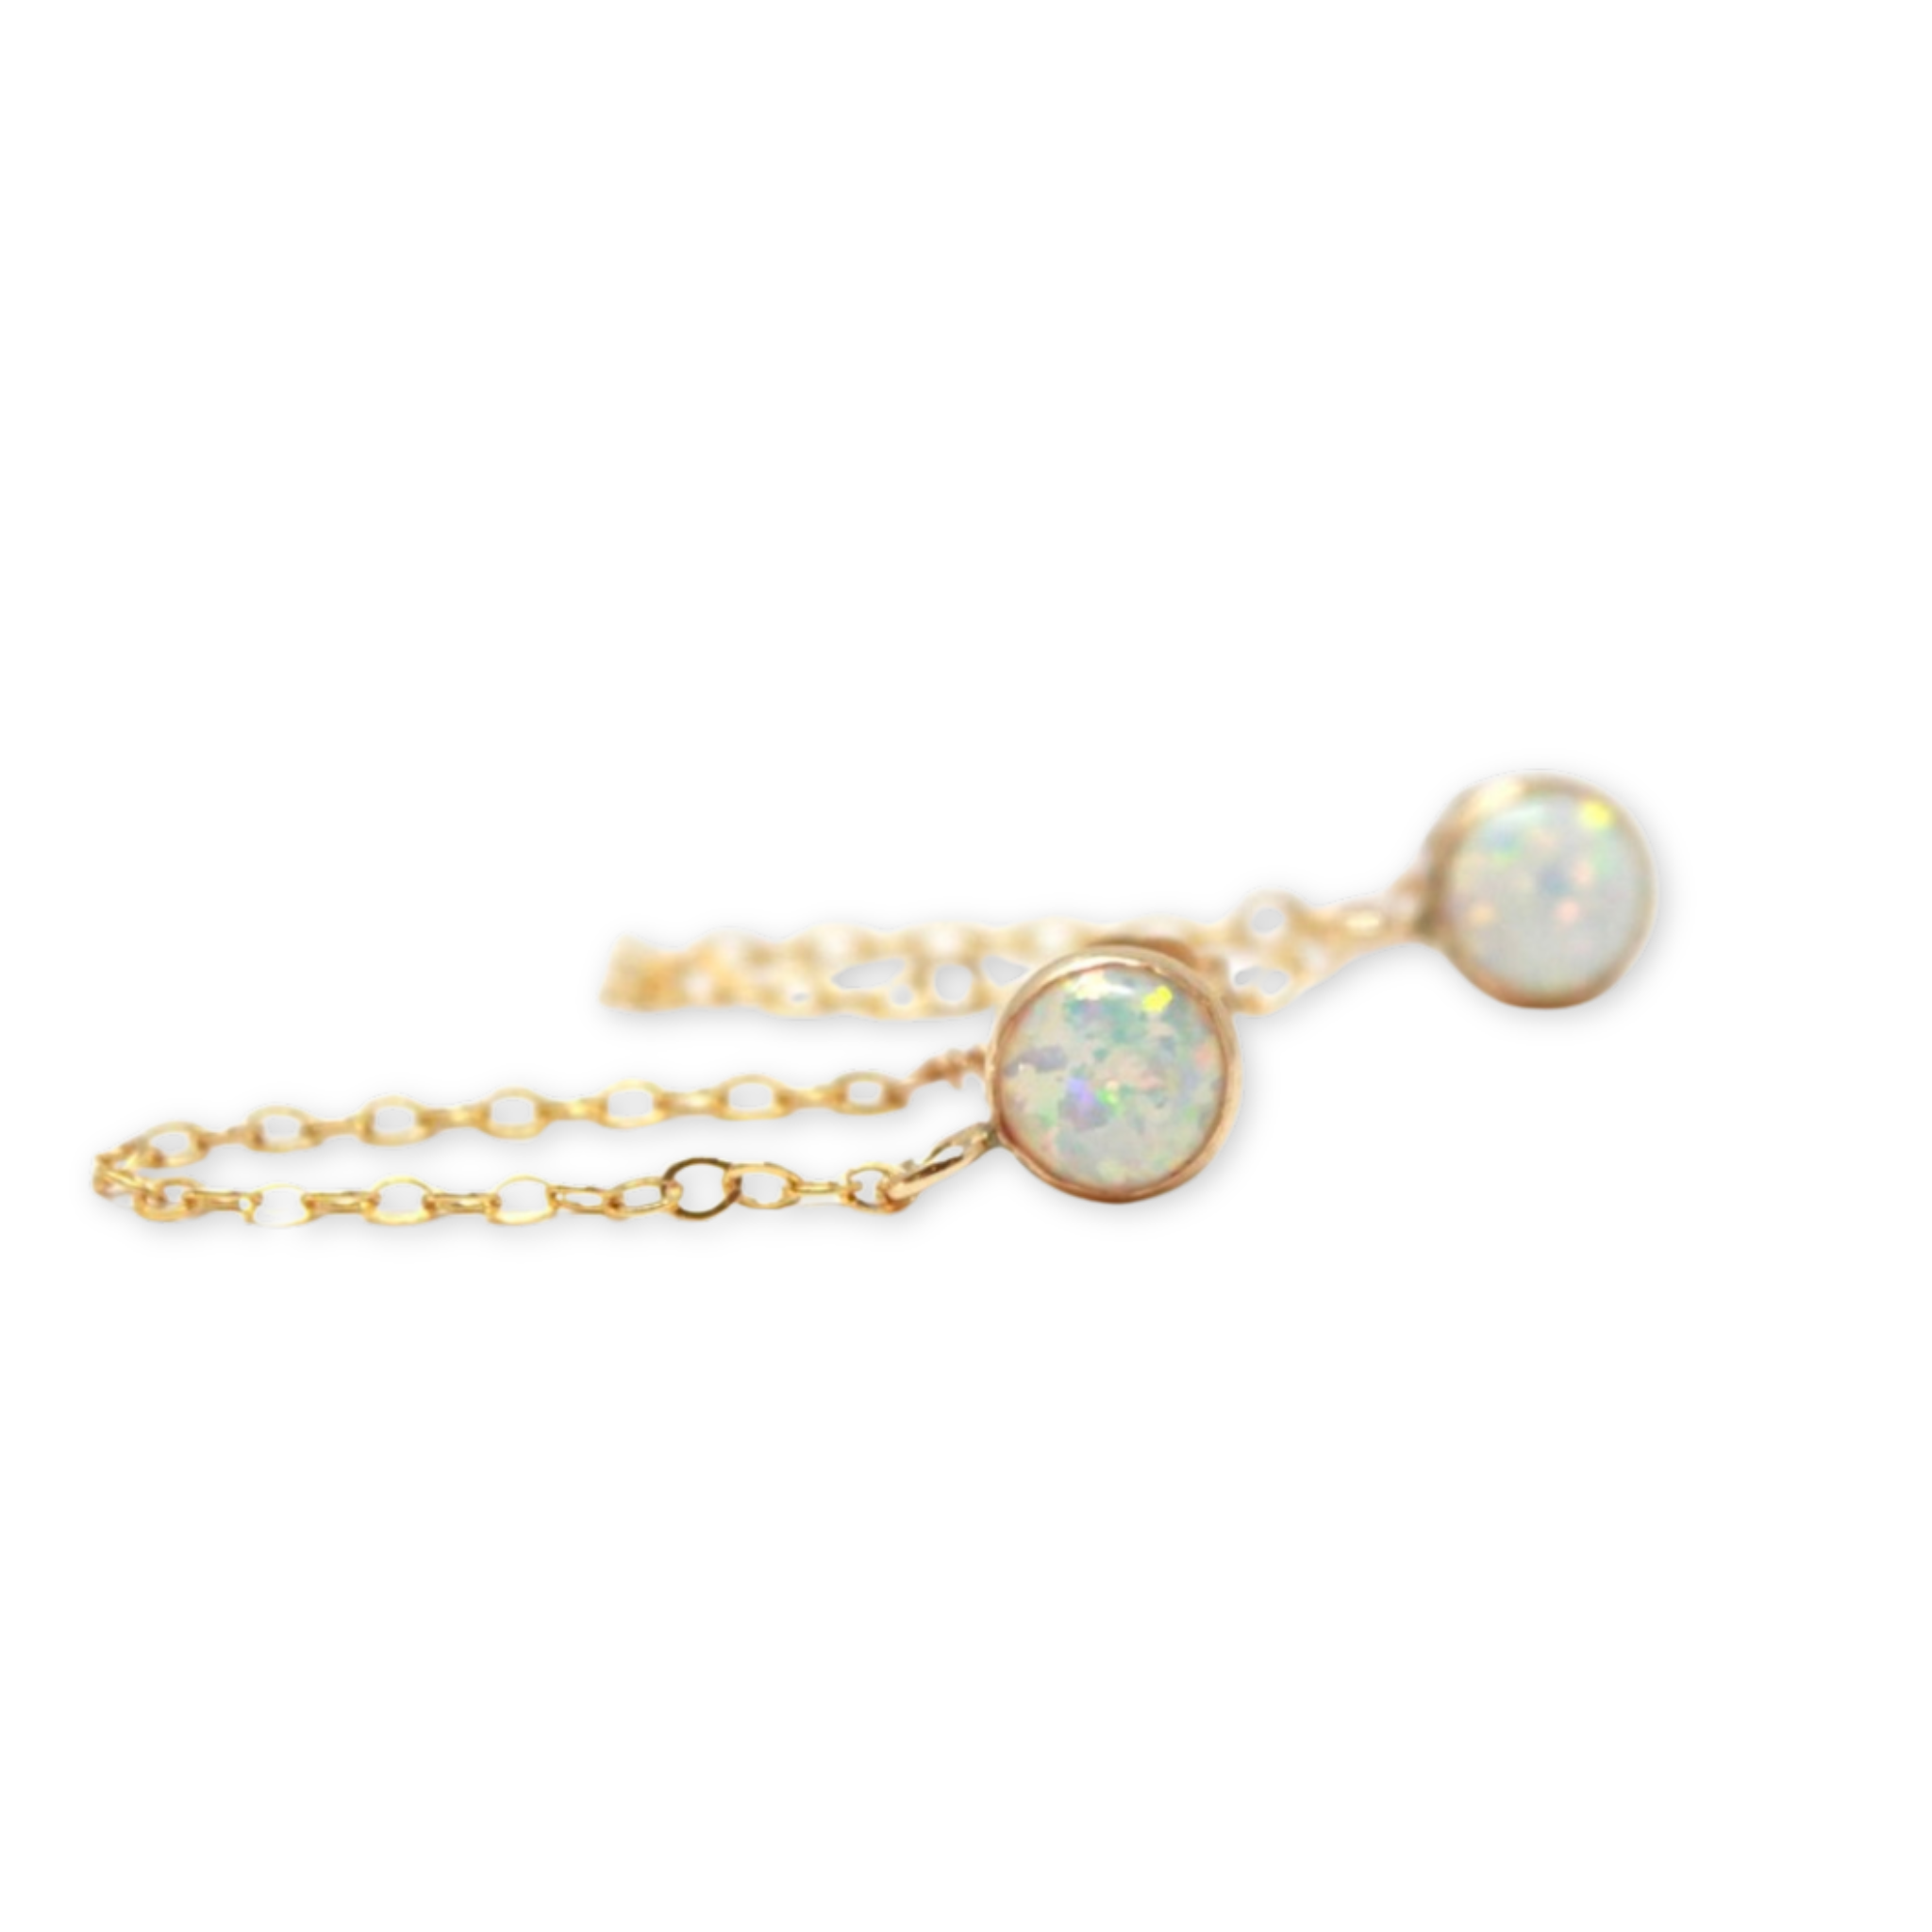 earrings with opals and small delicate chains